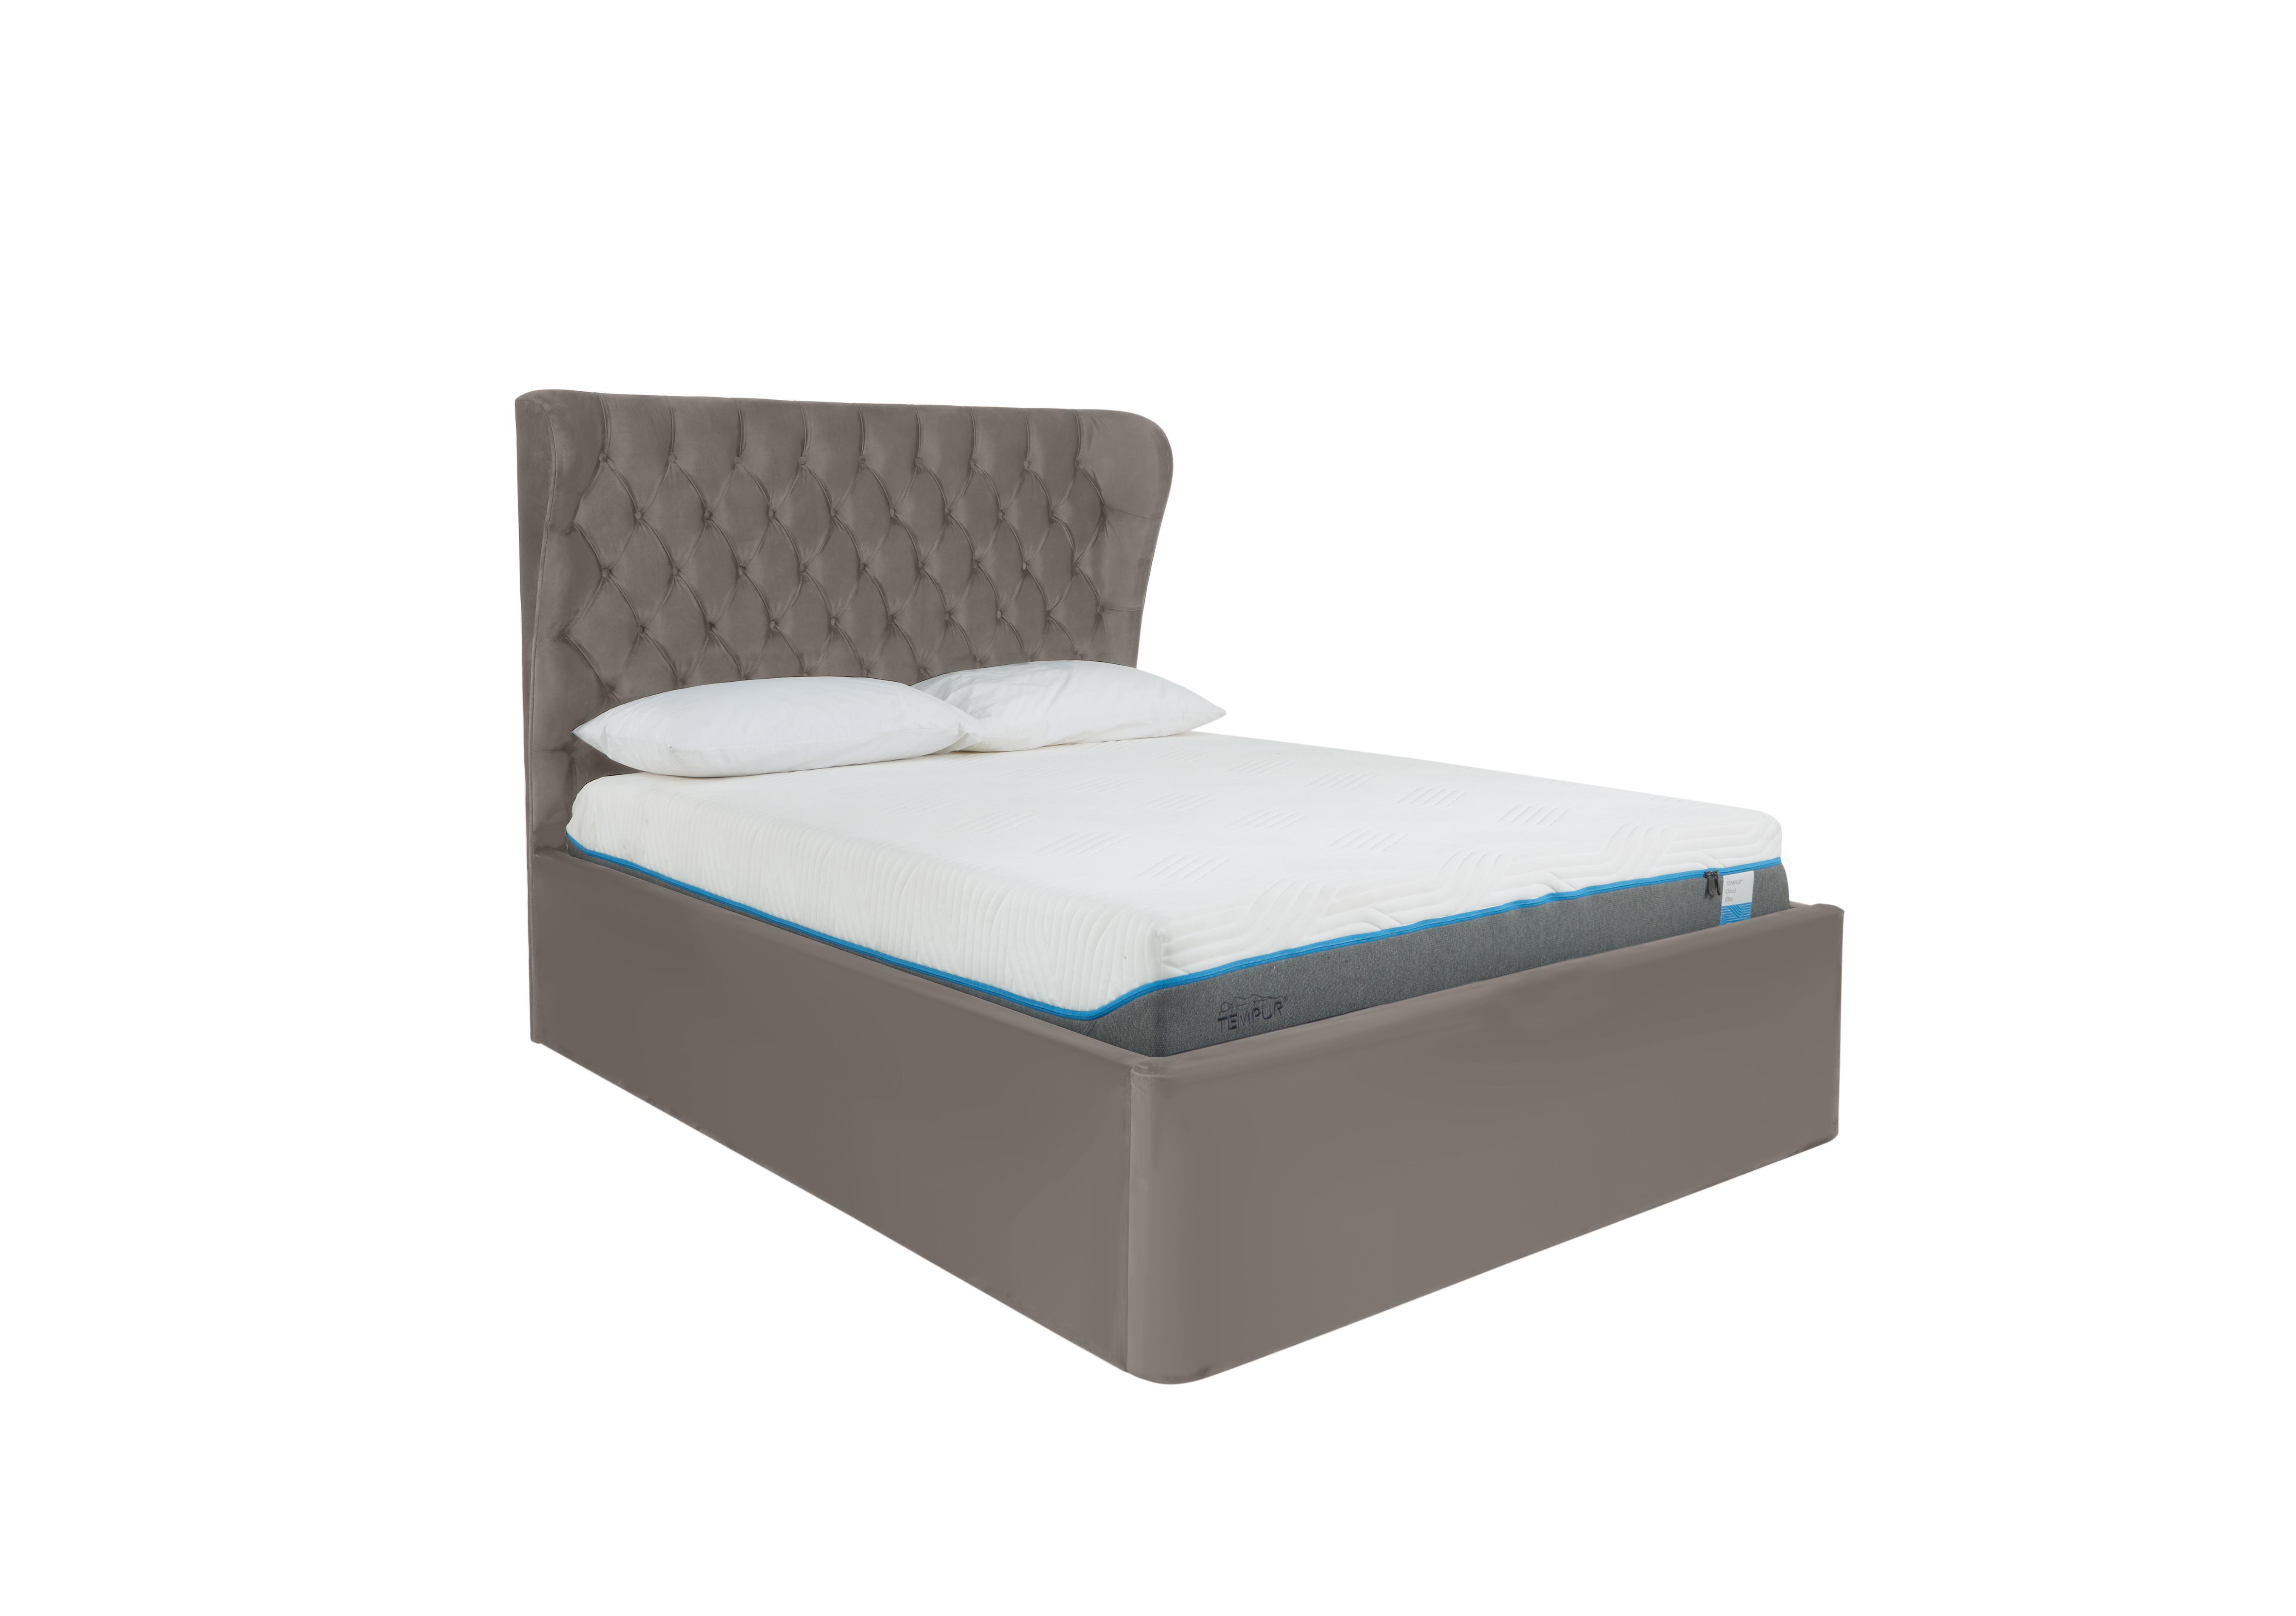 Kendall Ottoman Bed Frame in Sanderson Potters Clay on Furniture Village